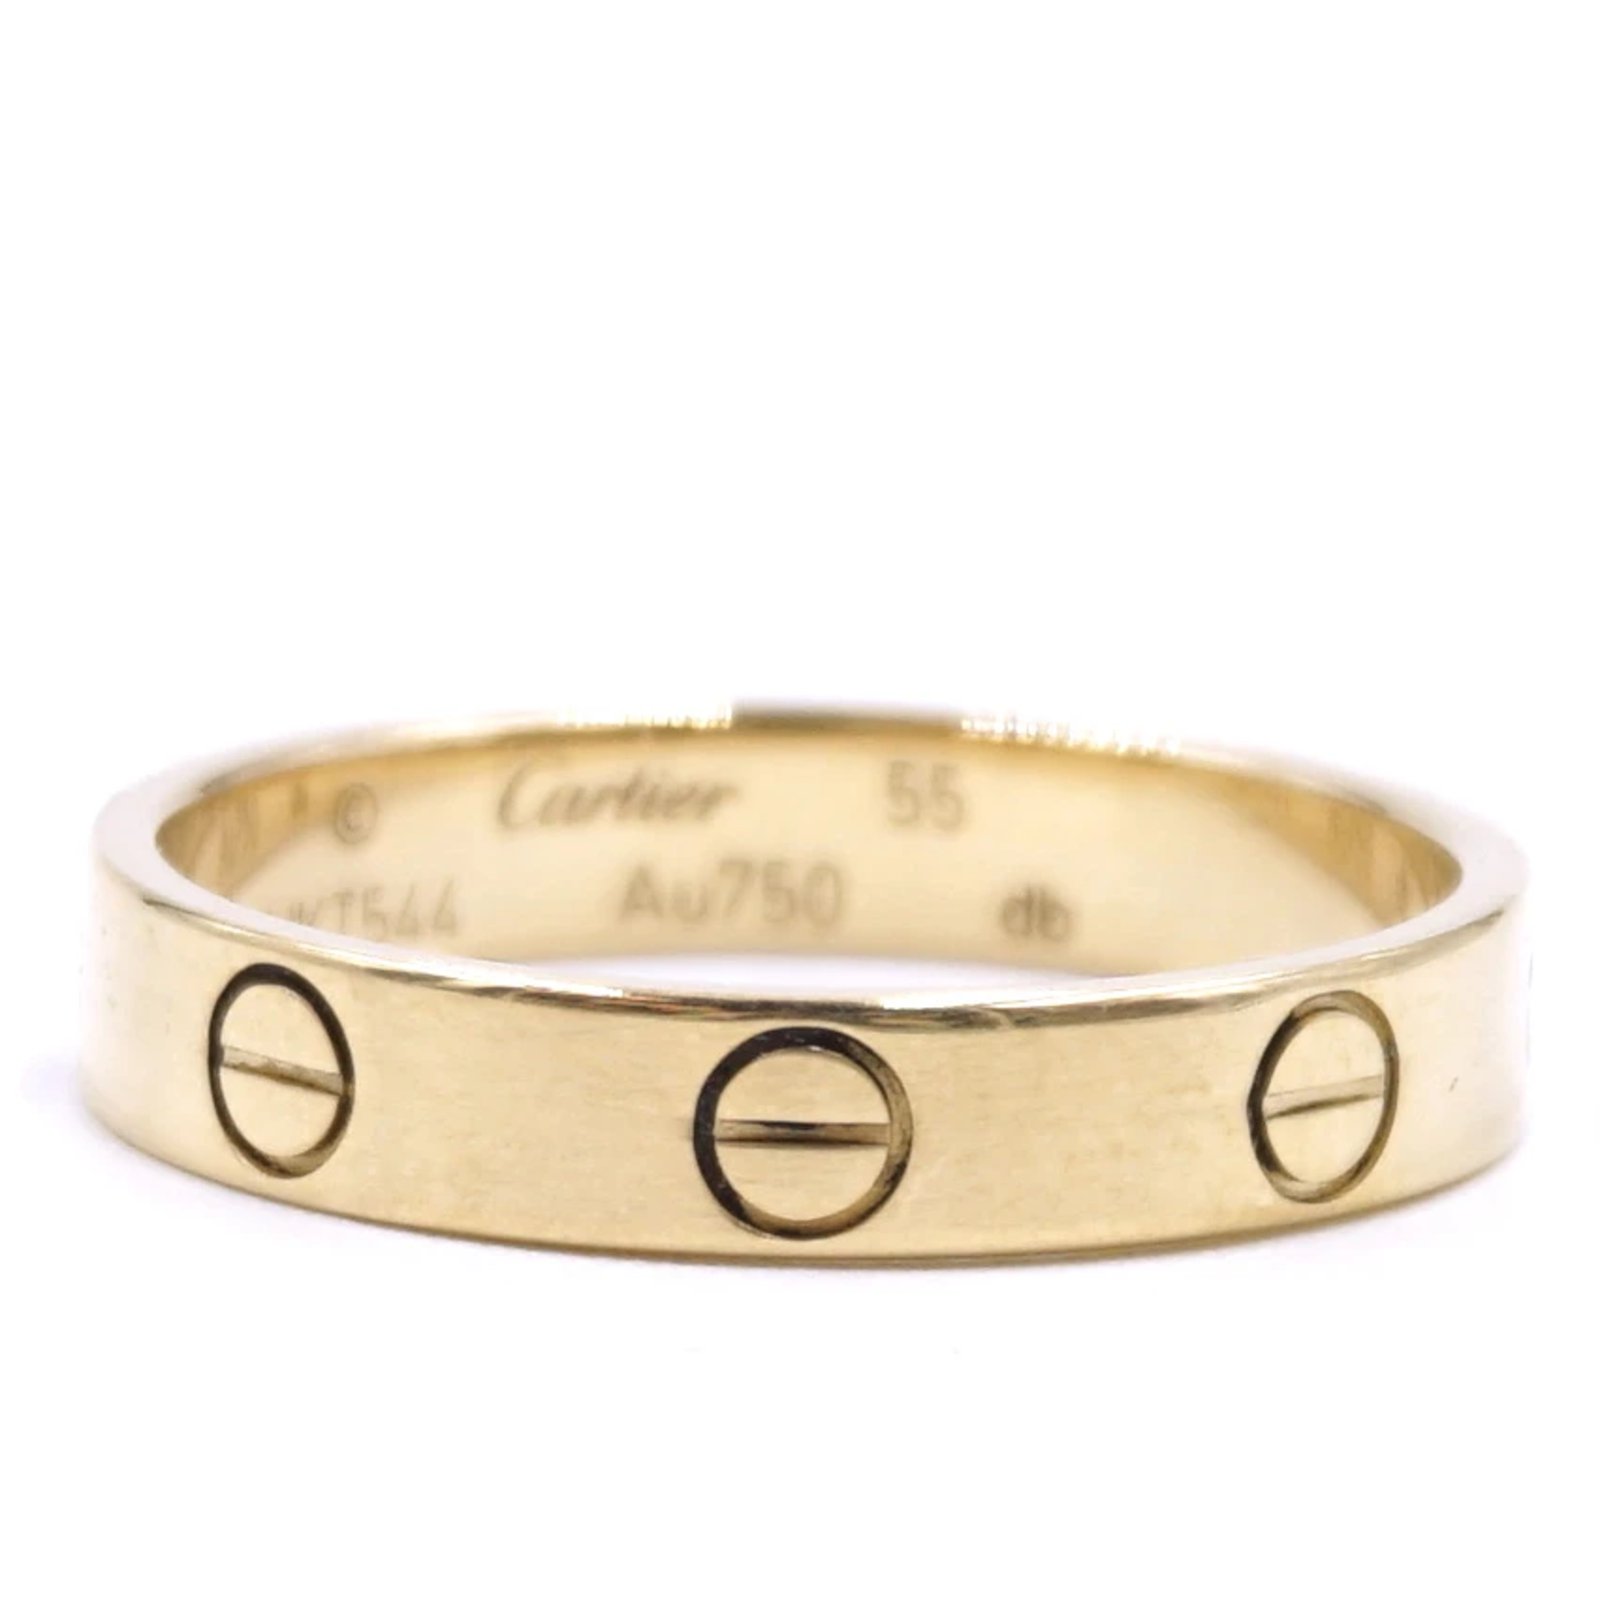 cartier 55 ring size